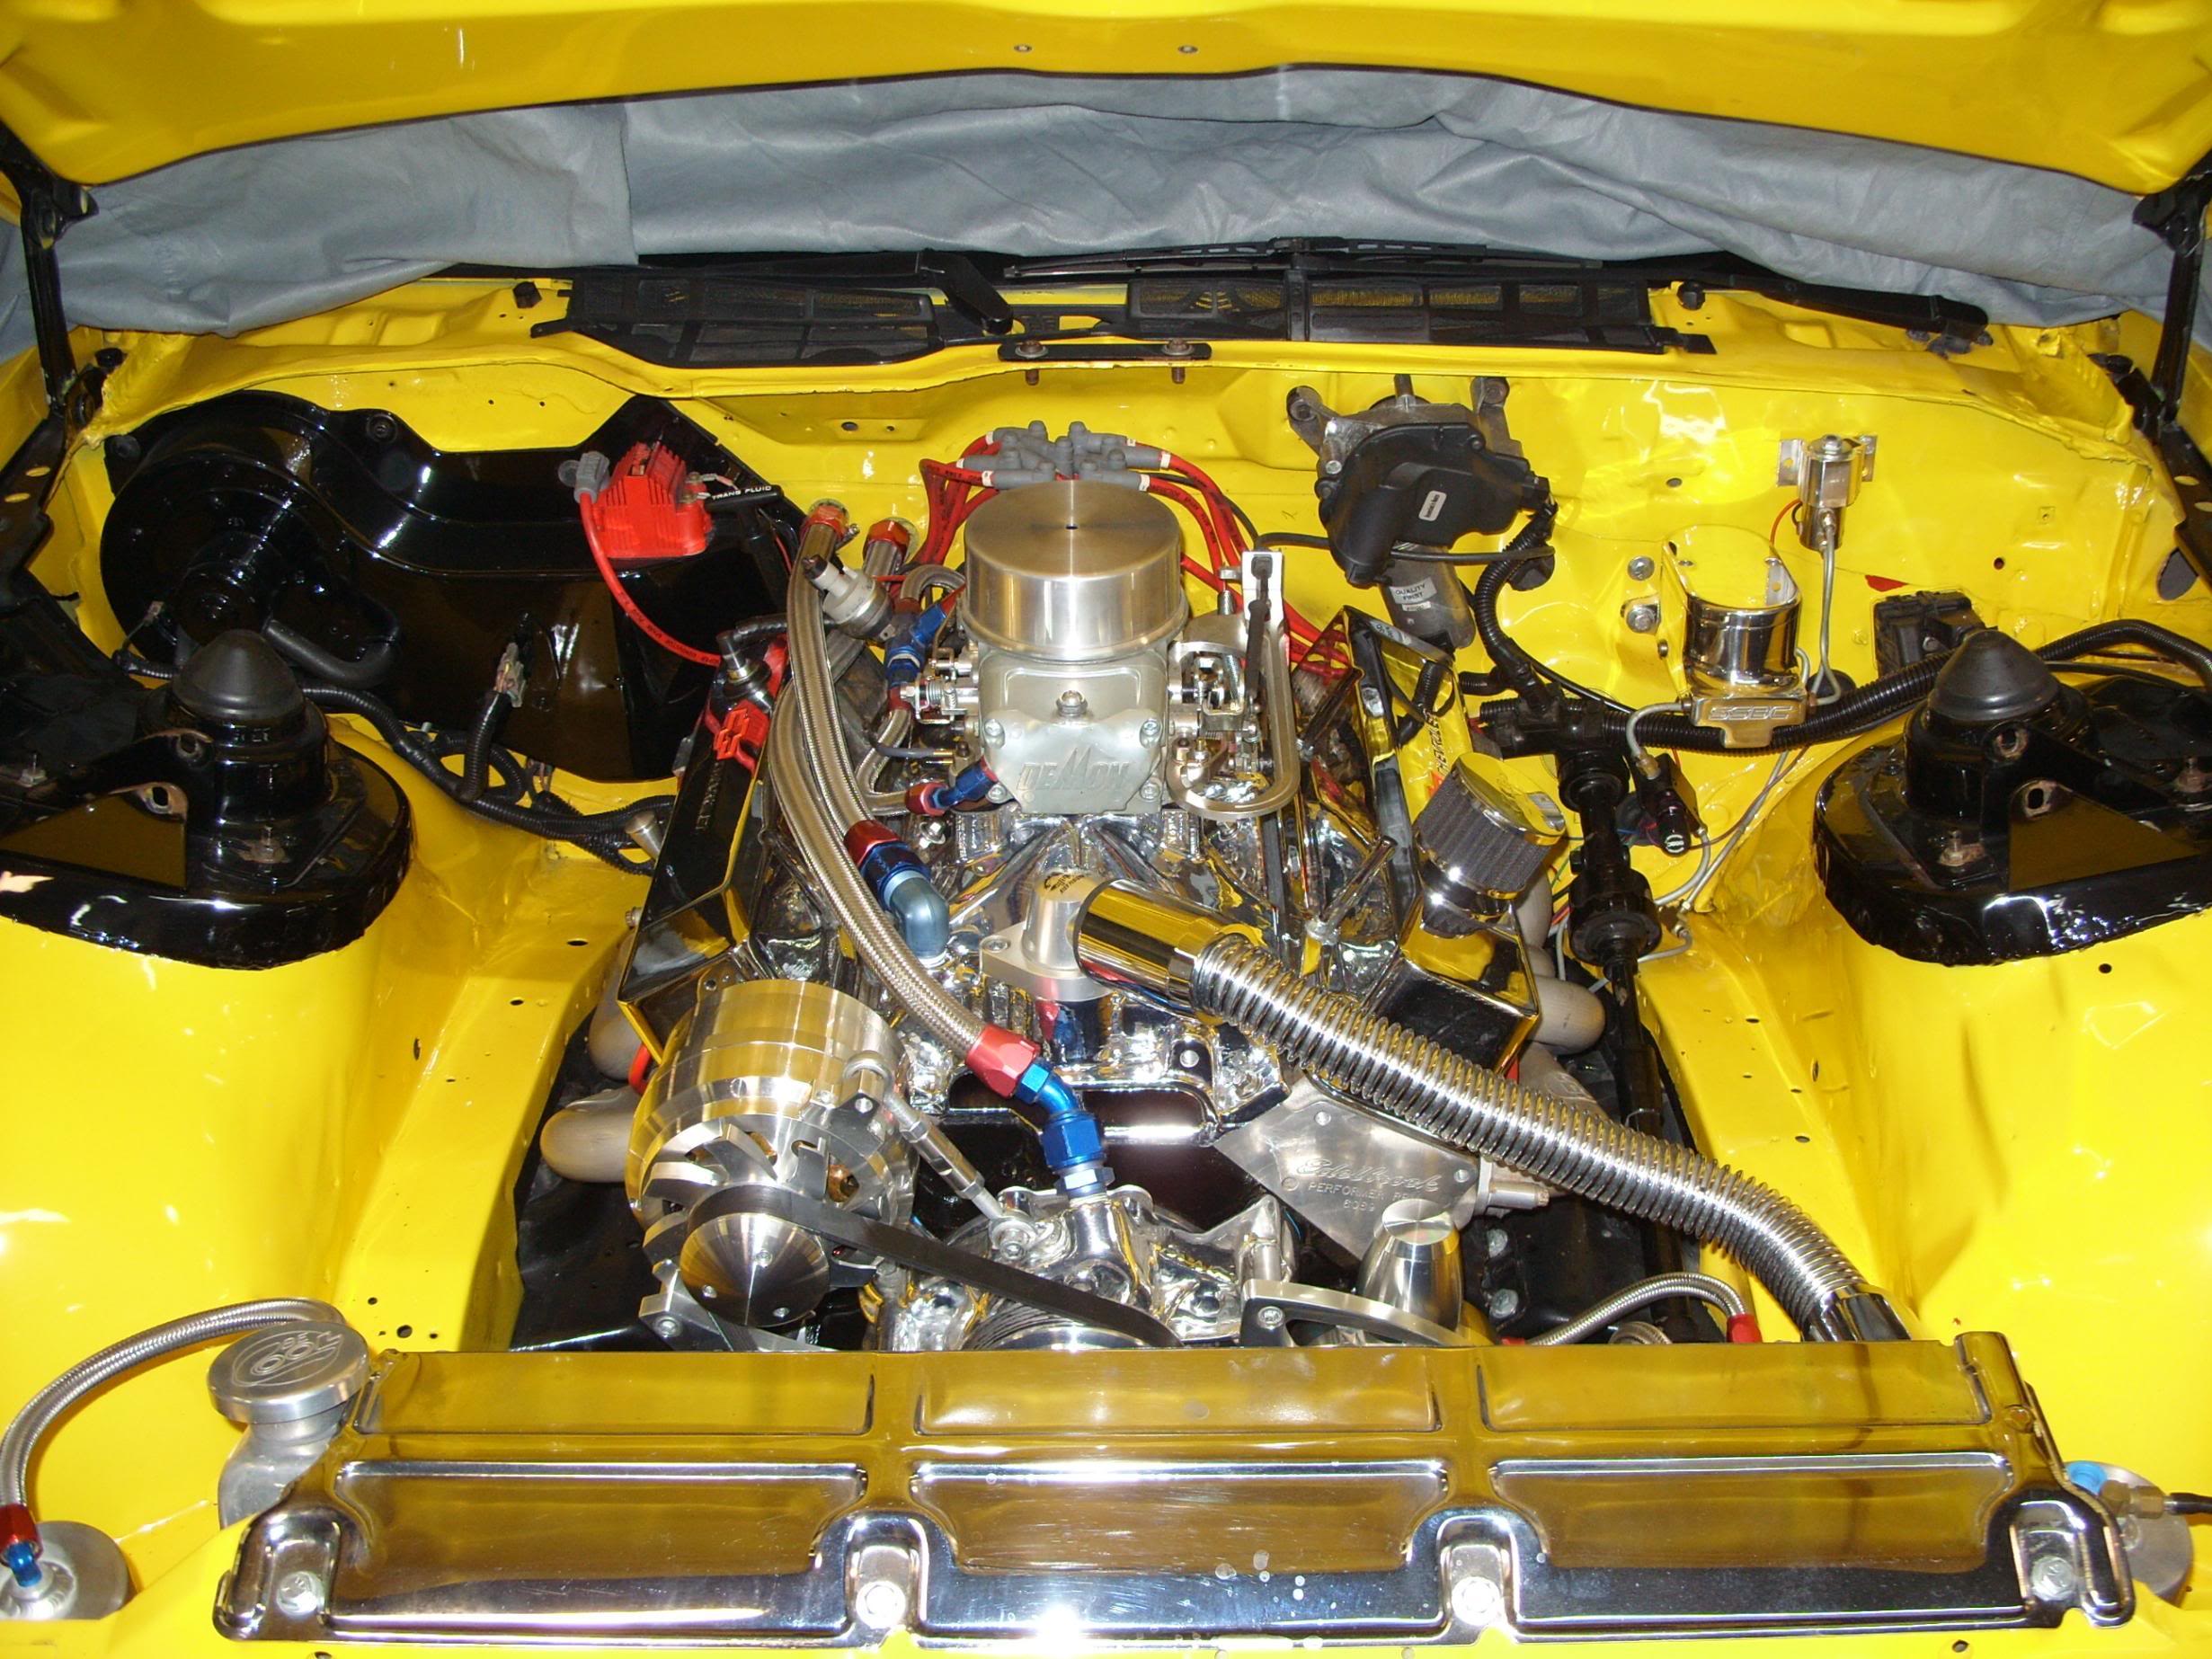 Swapping from TBI to Carb and I need some pics of carb'd engines ...